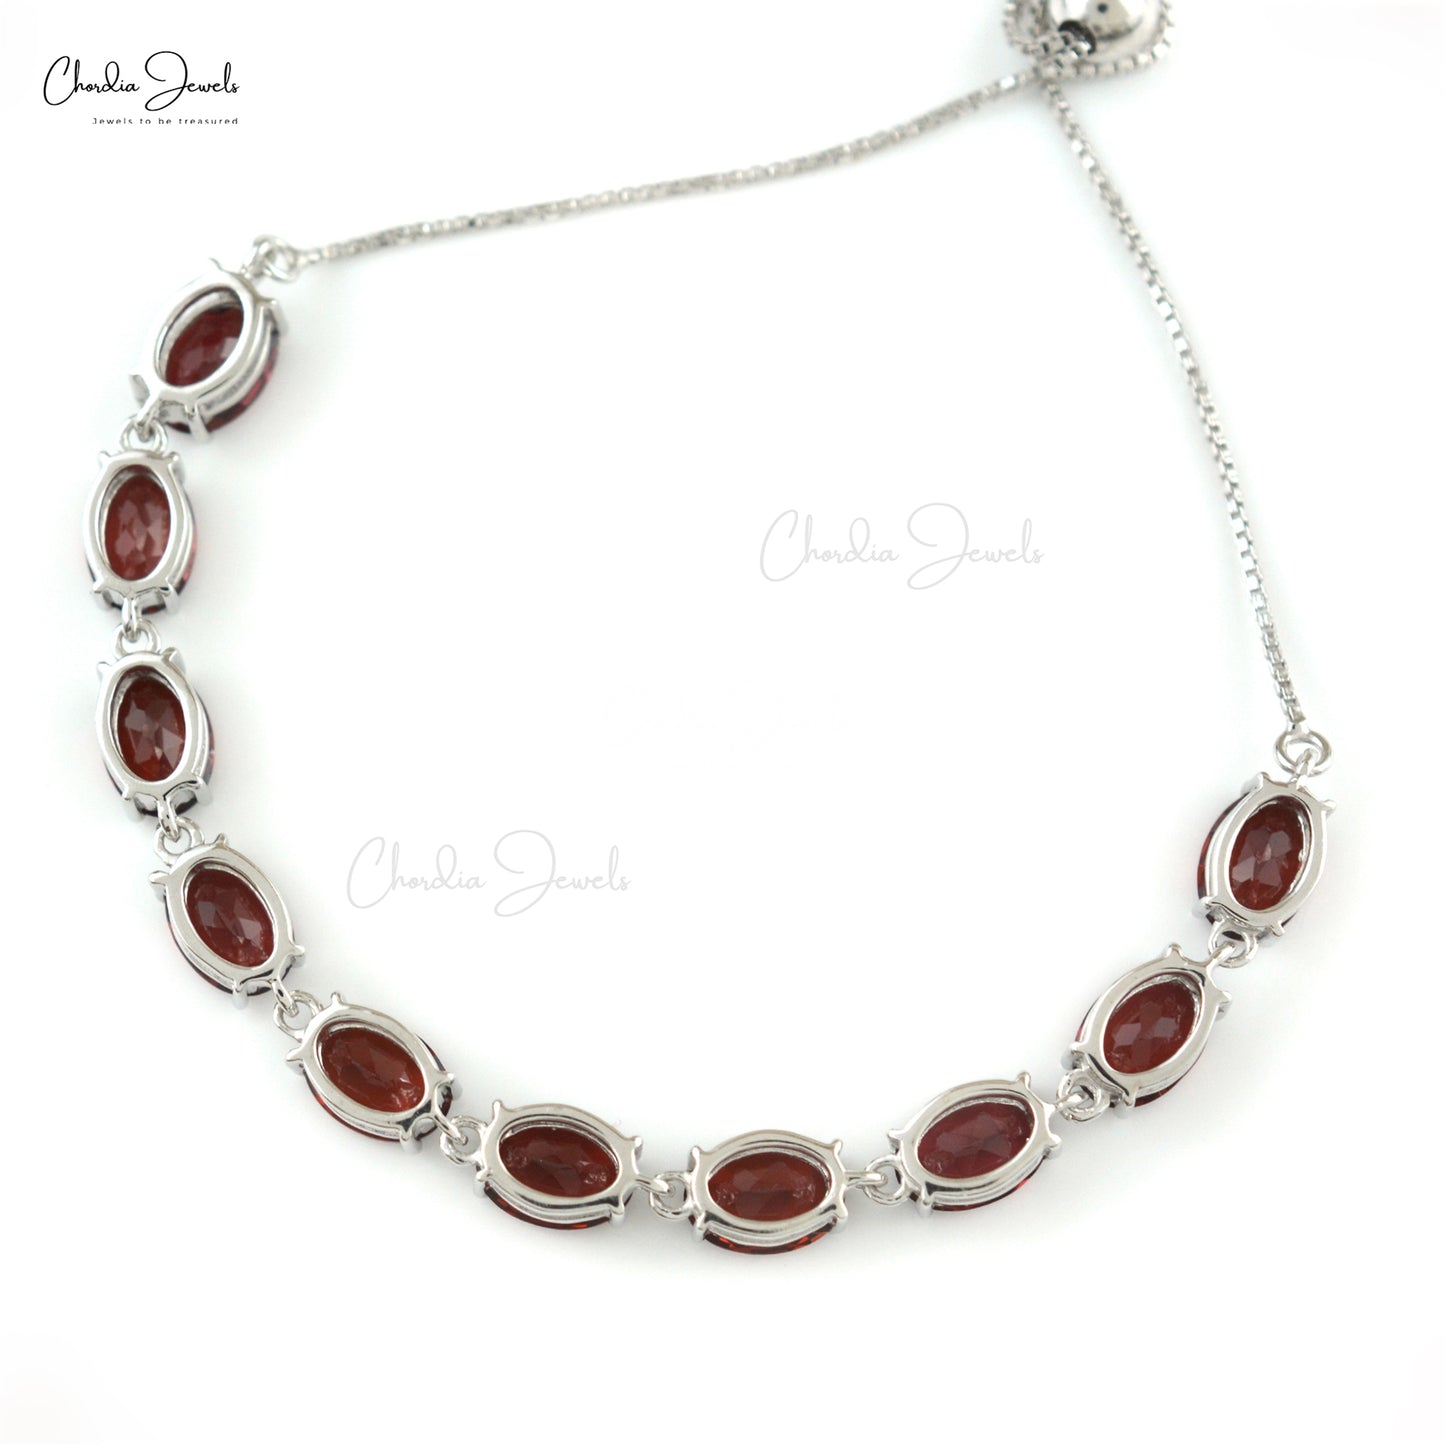 Authentic Garnet Tennis Bracelet High Quality Jewelry 925 Sterling Sil